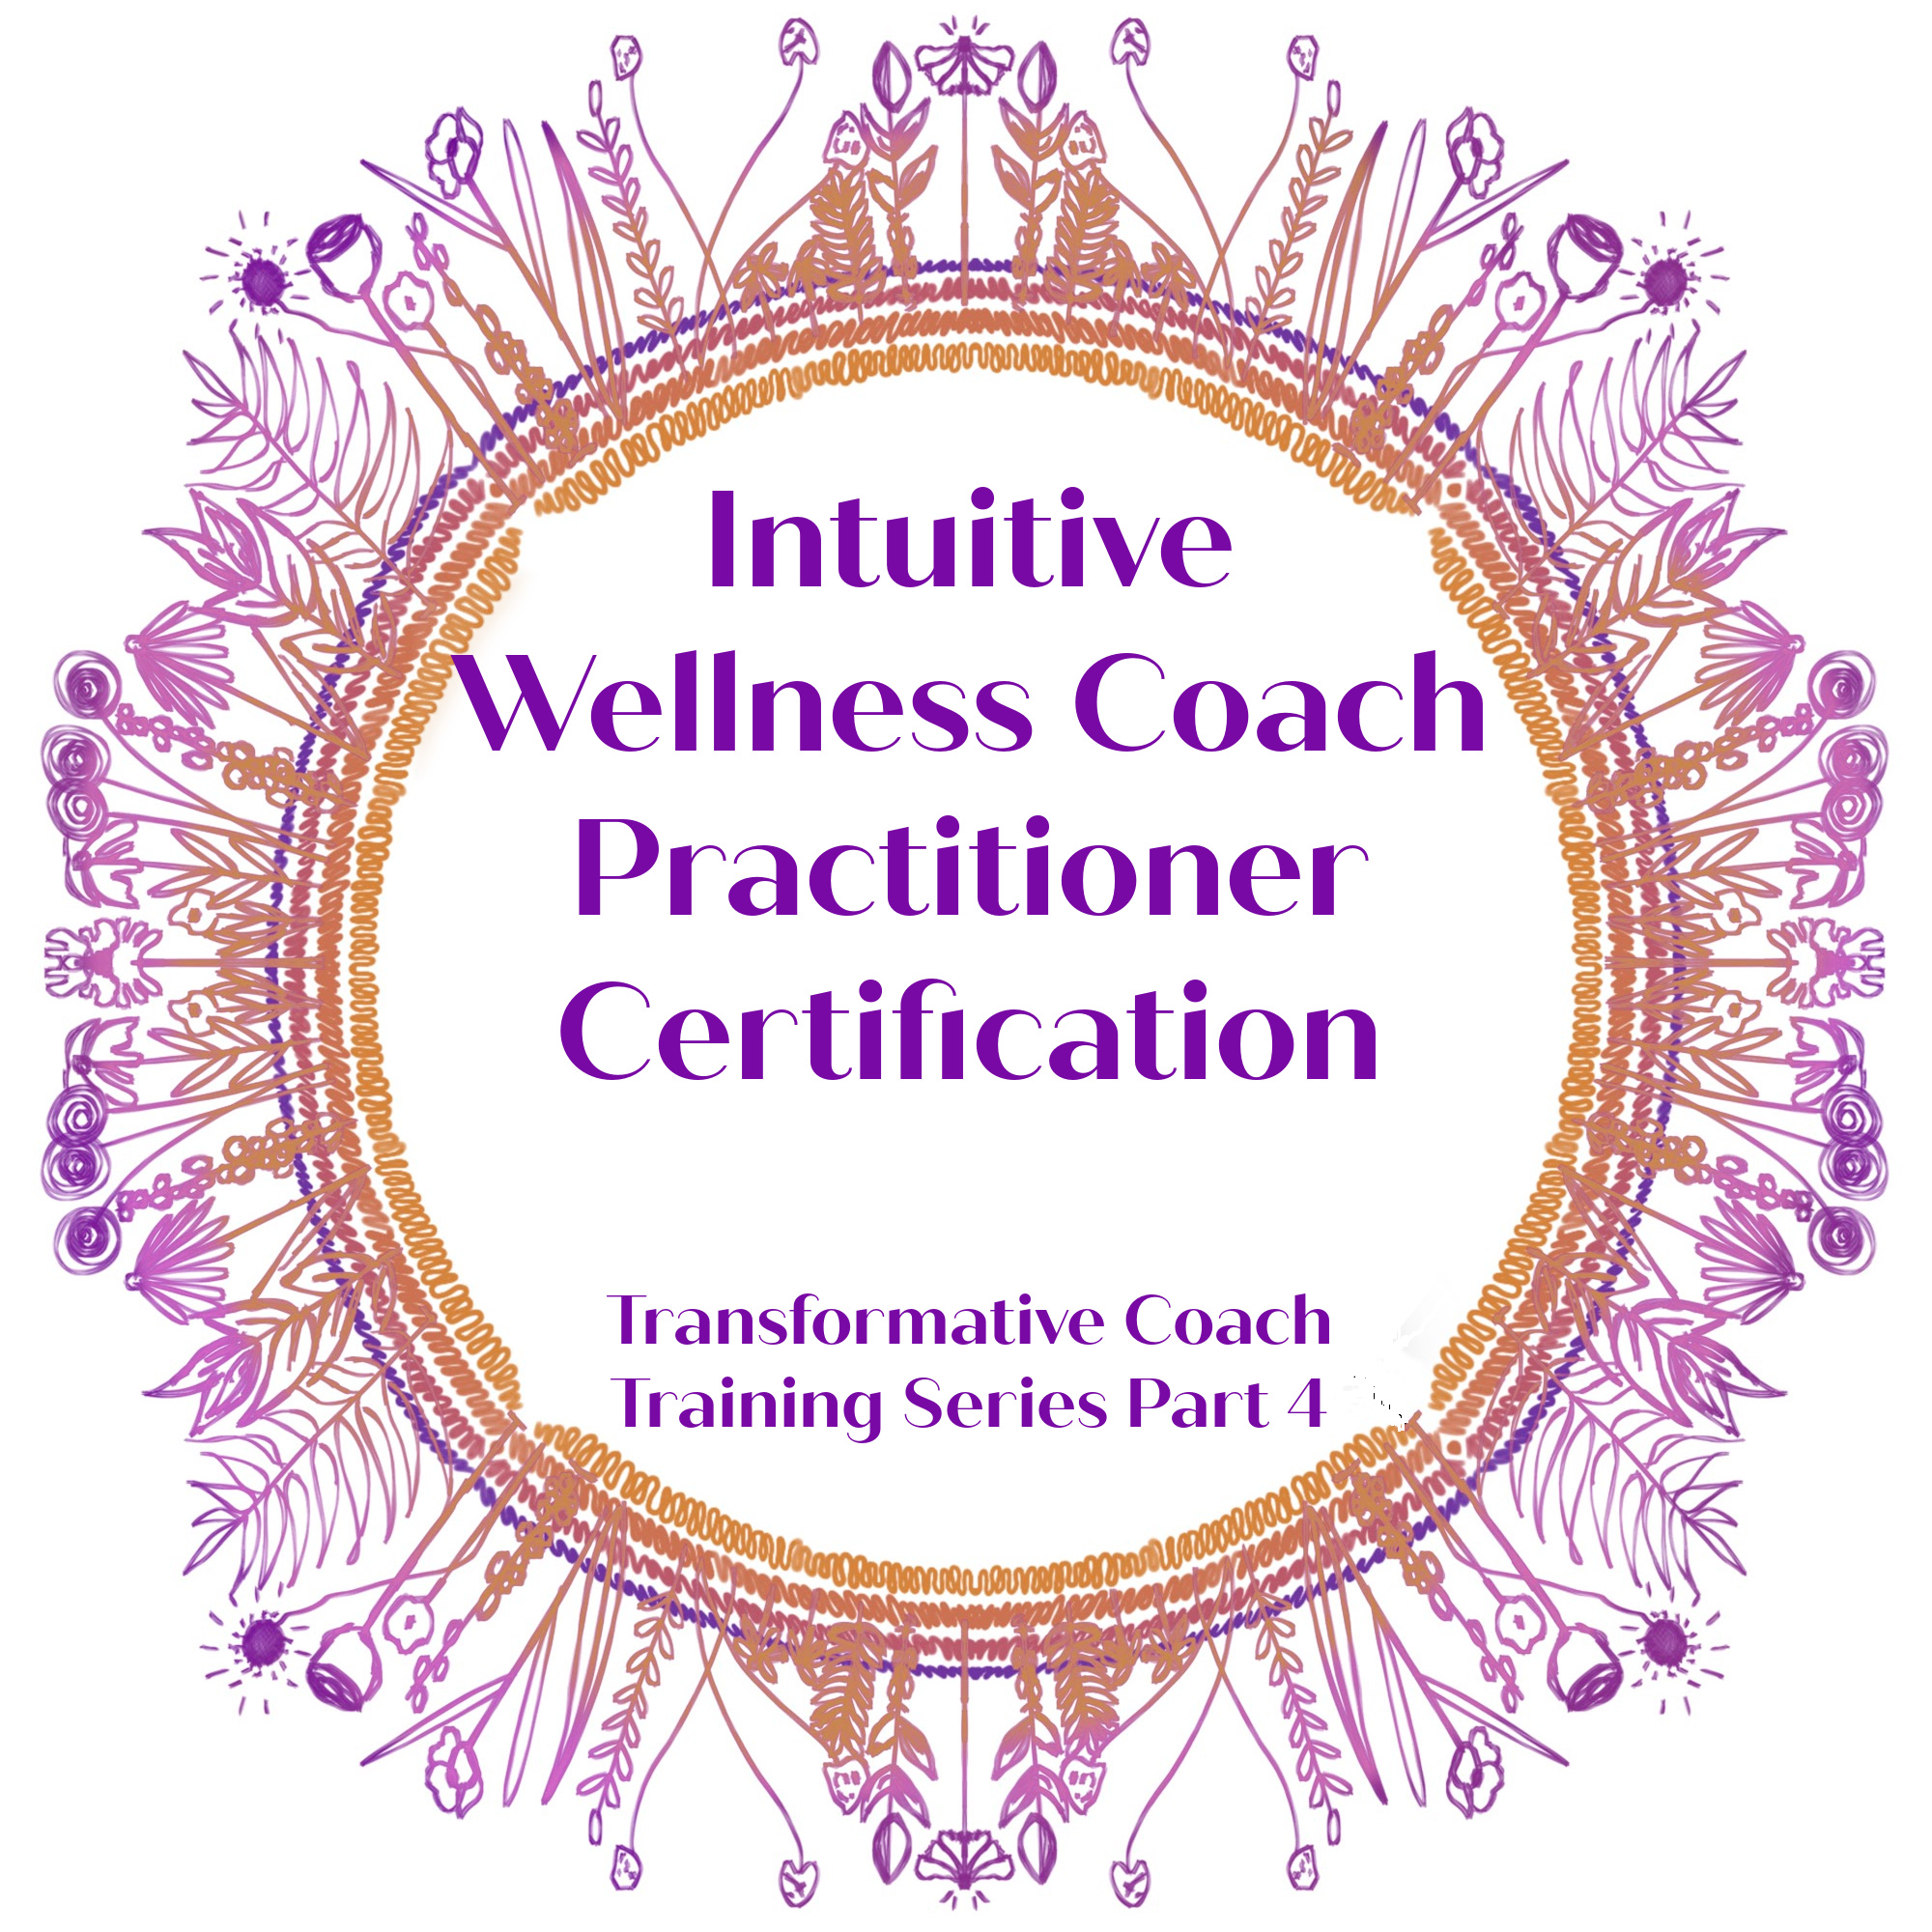 Certified Intuitive Wellness Coach Practitioner